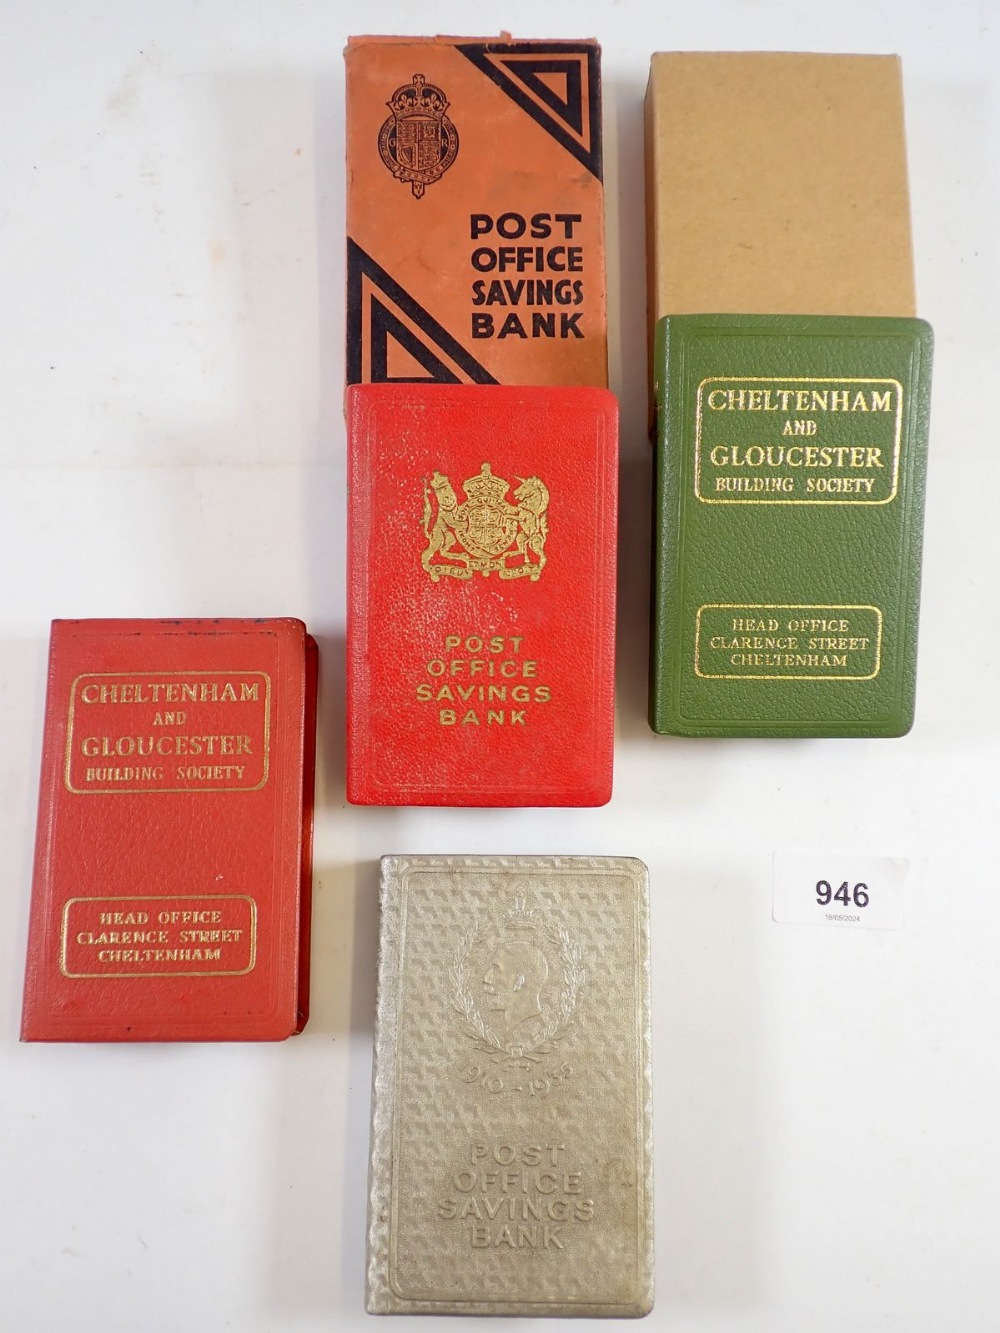 Two Post Office savings banks and two Cheltenham and Gloucester Building Society banks